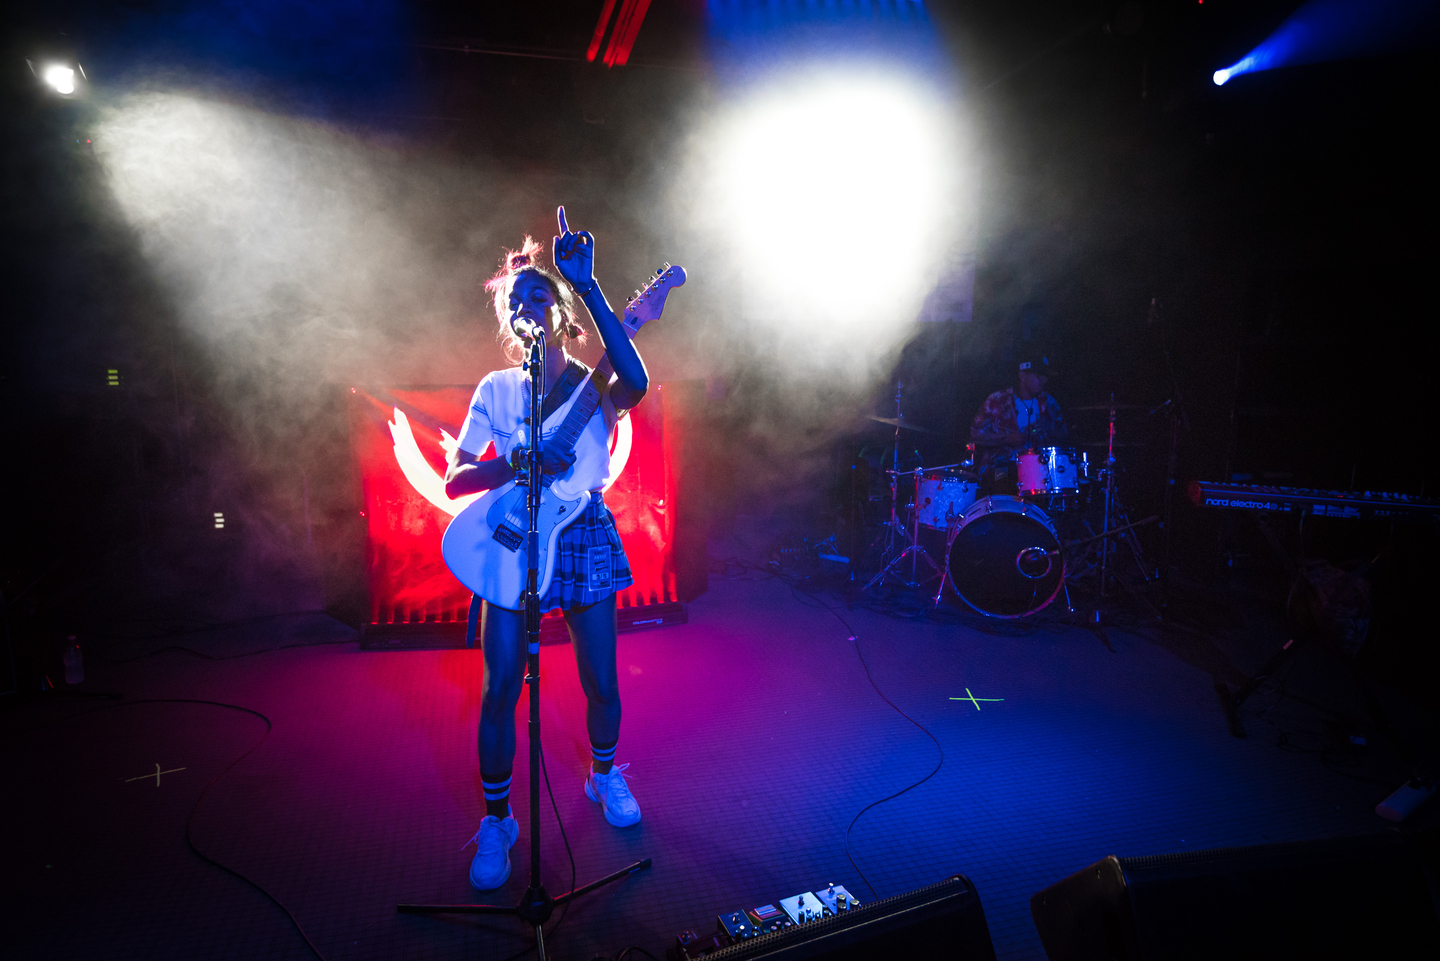 BAYLI at Empire Garage, presented by Treble – Photo by Christopher Bouie